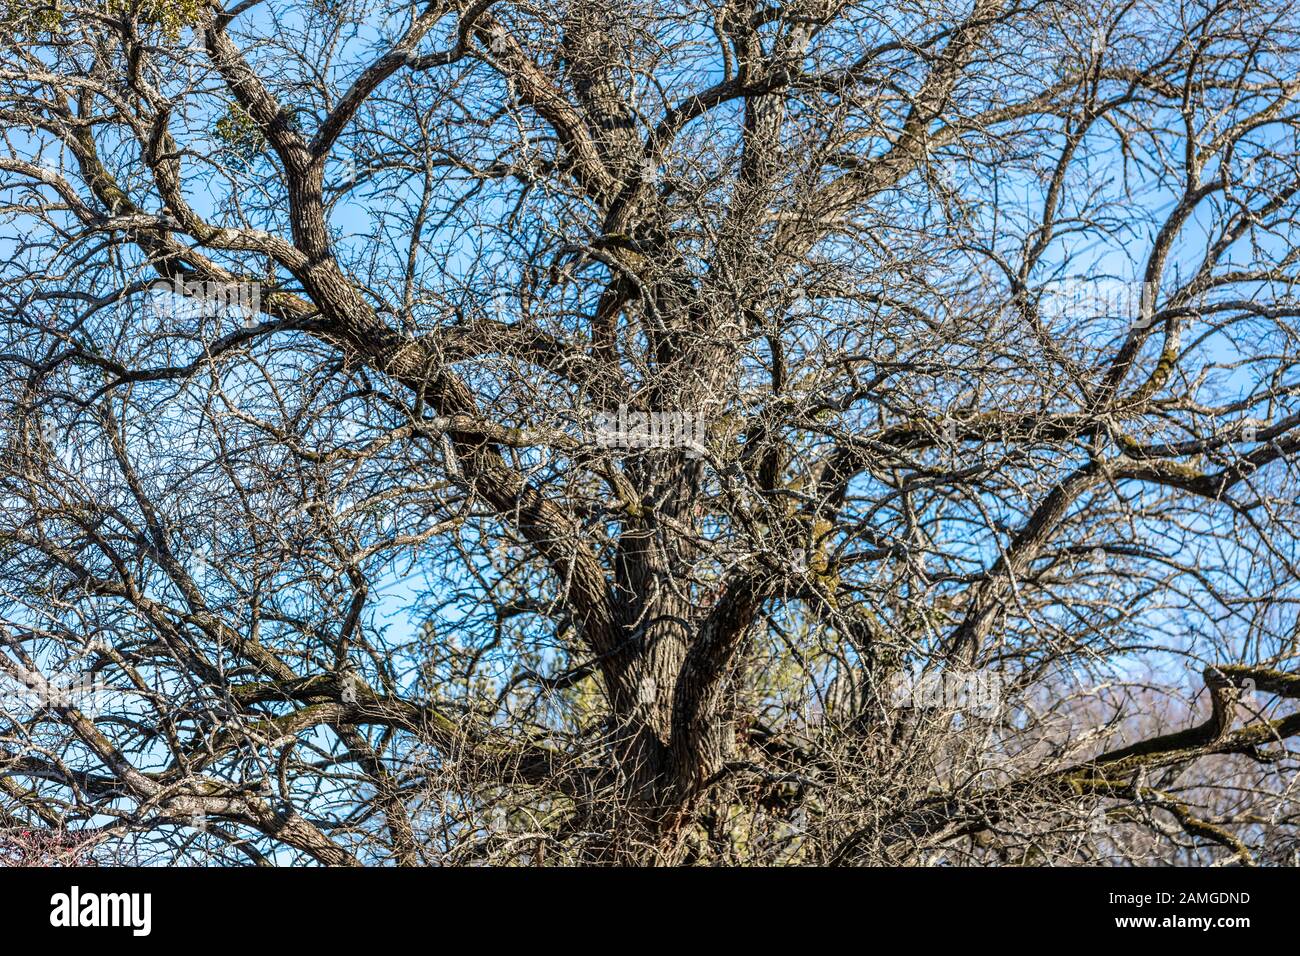 detail image of a complicated branch system of a tree in winter Stock Photo